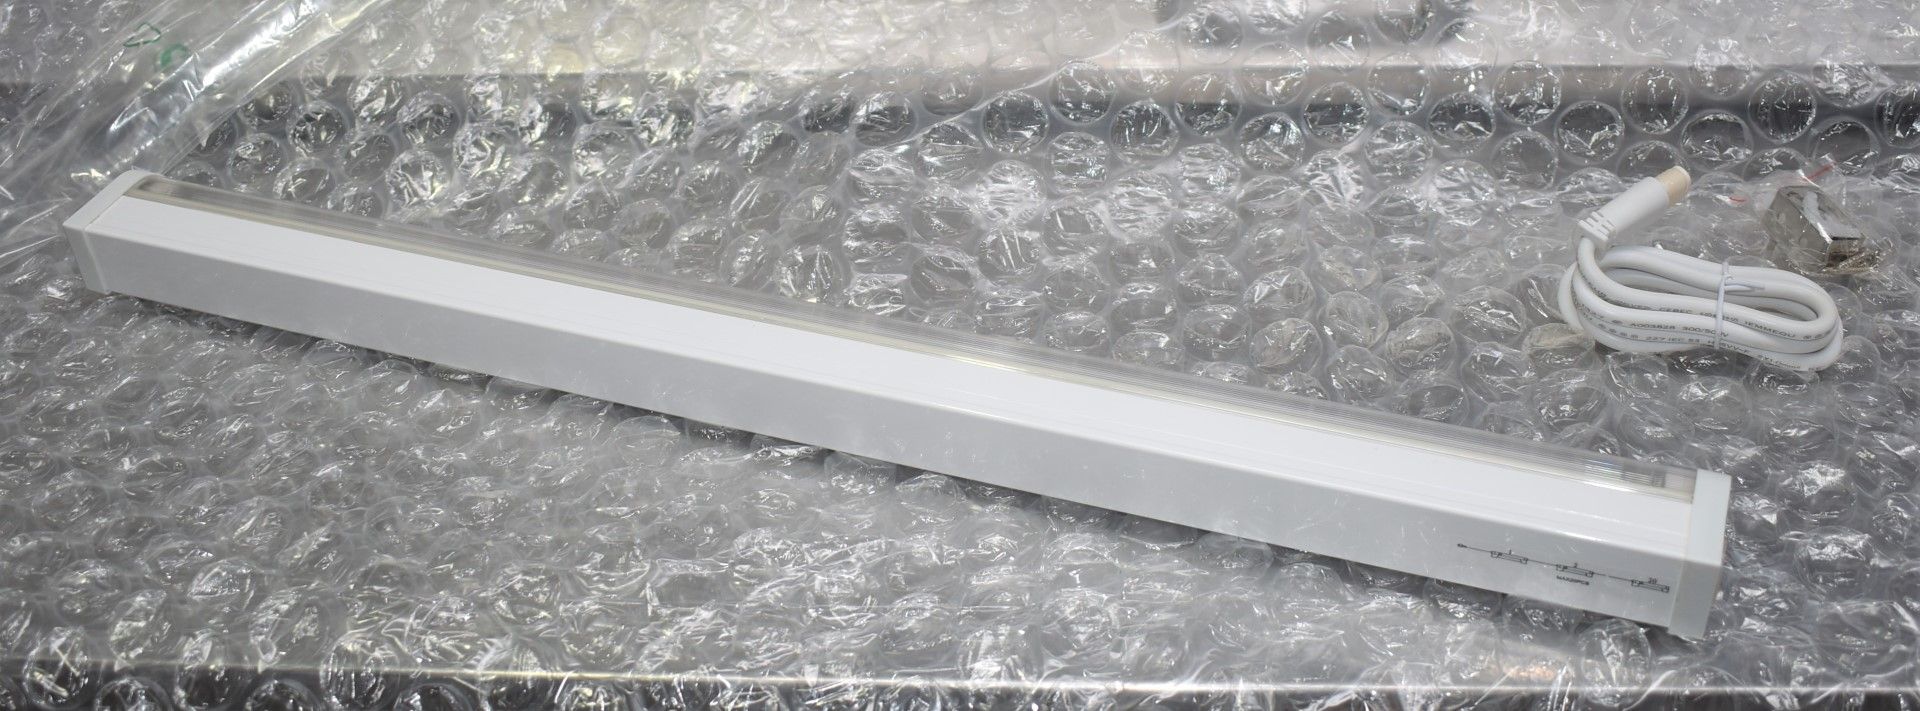 10 x Bathroom Light Fittings - IP44 Waterproof T5 14w Fluorescent Lights With Built-In Electronic - Image 7 of 11